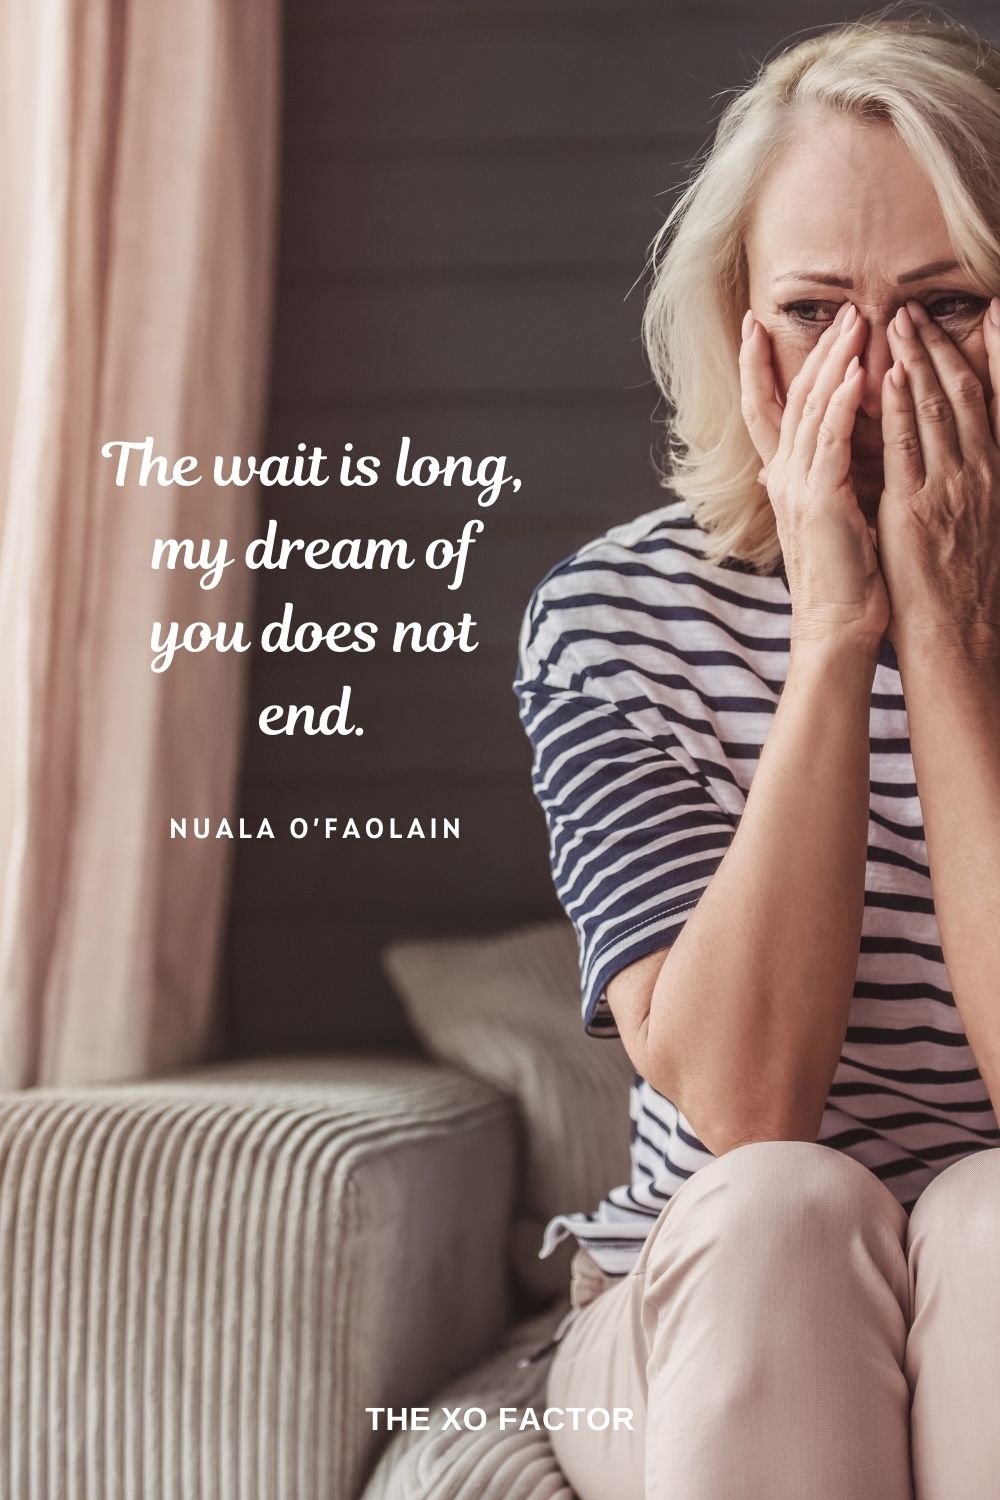 The wait is long, my dream of you does not end. Nuala O’Faolain